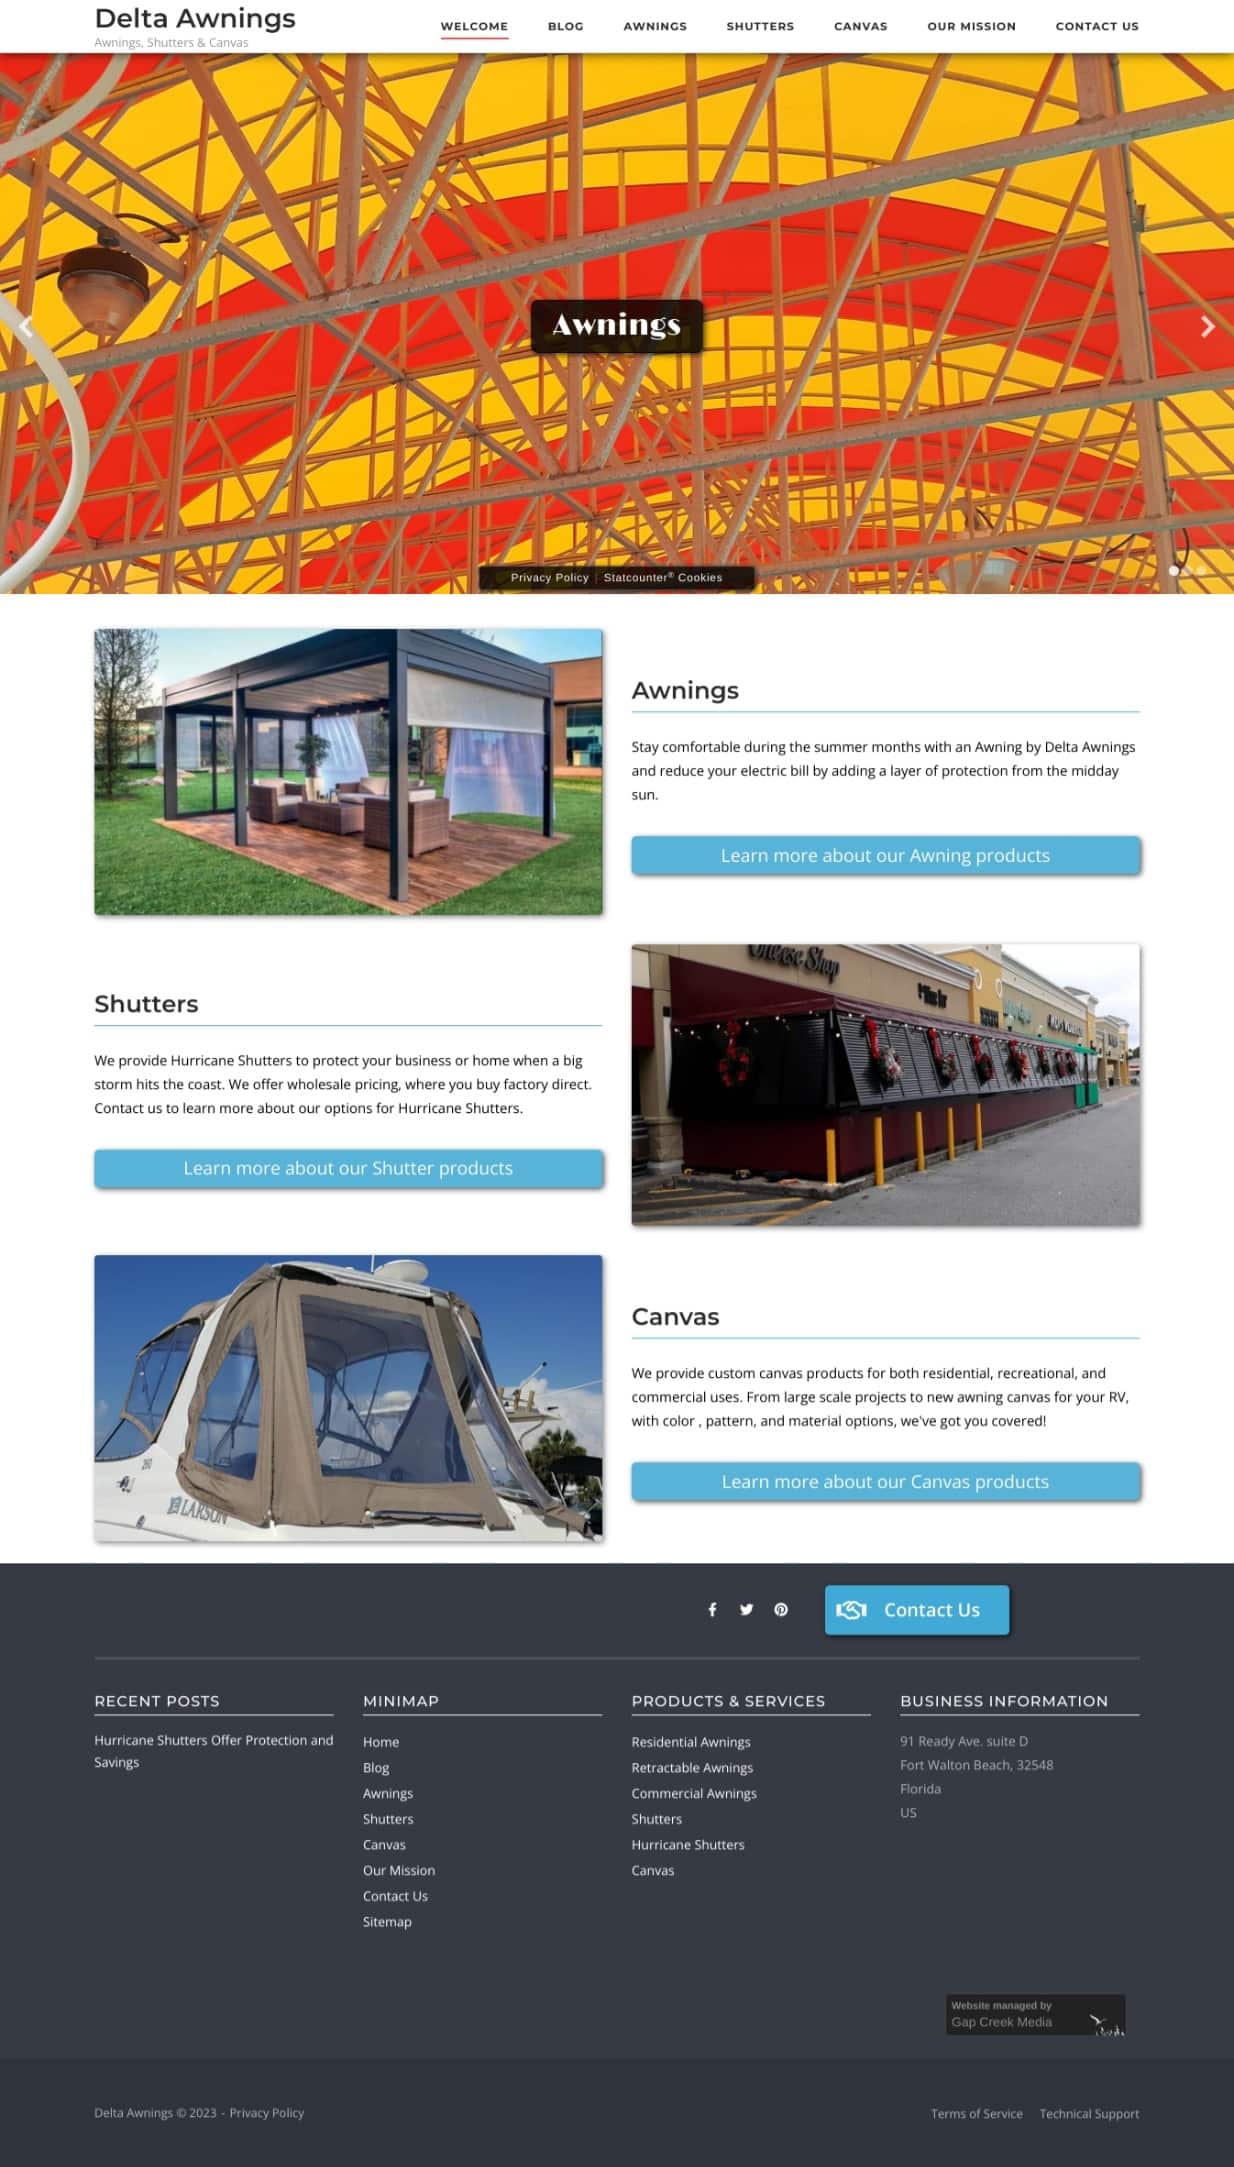 Delta Awnings